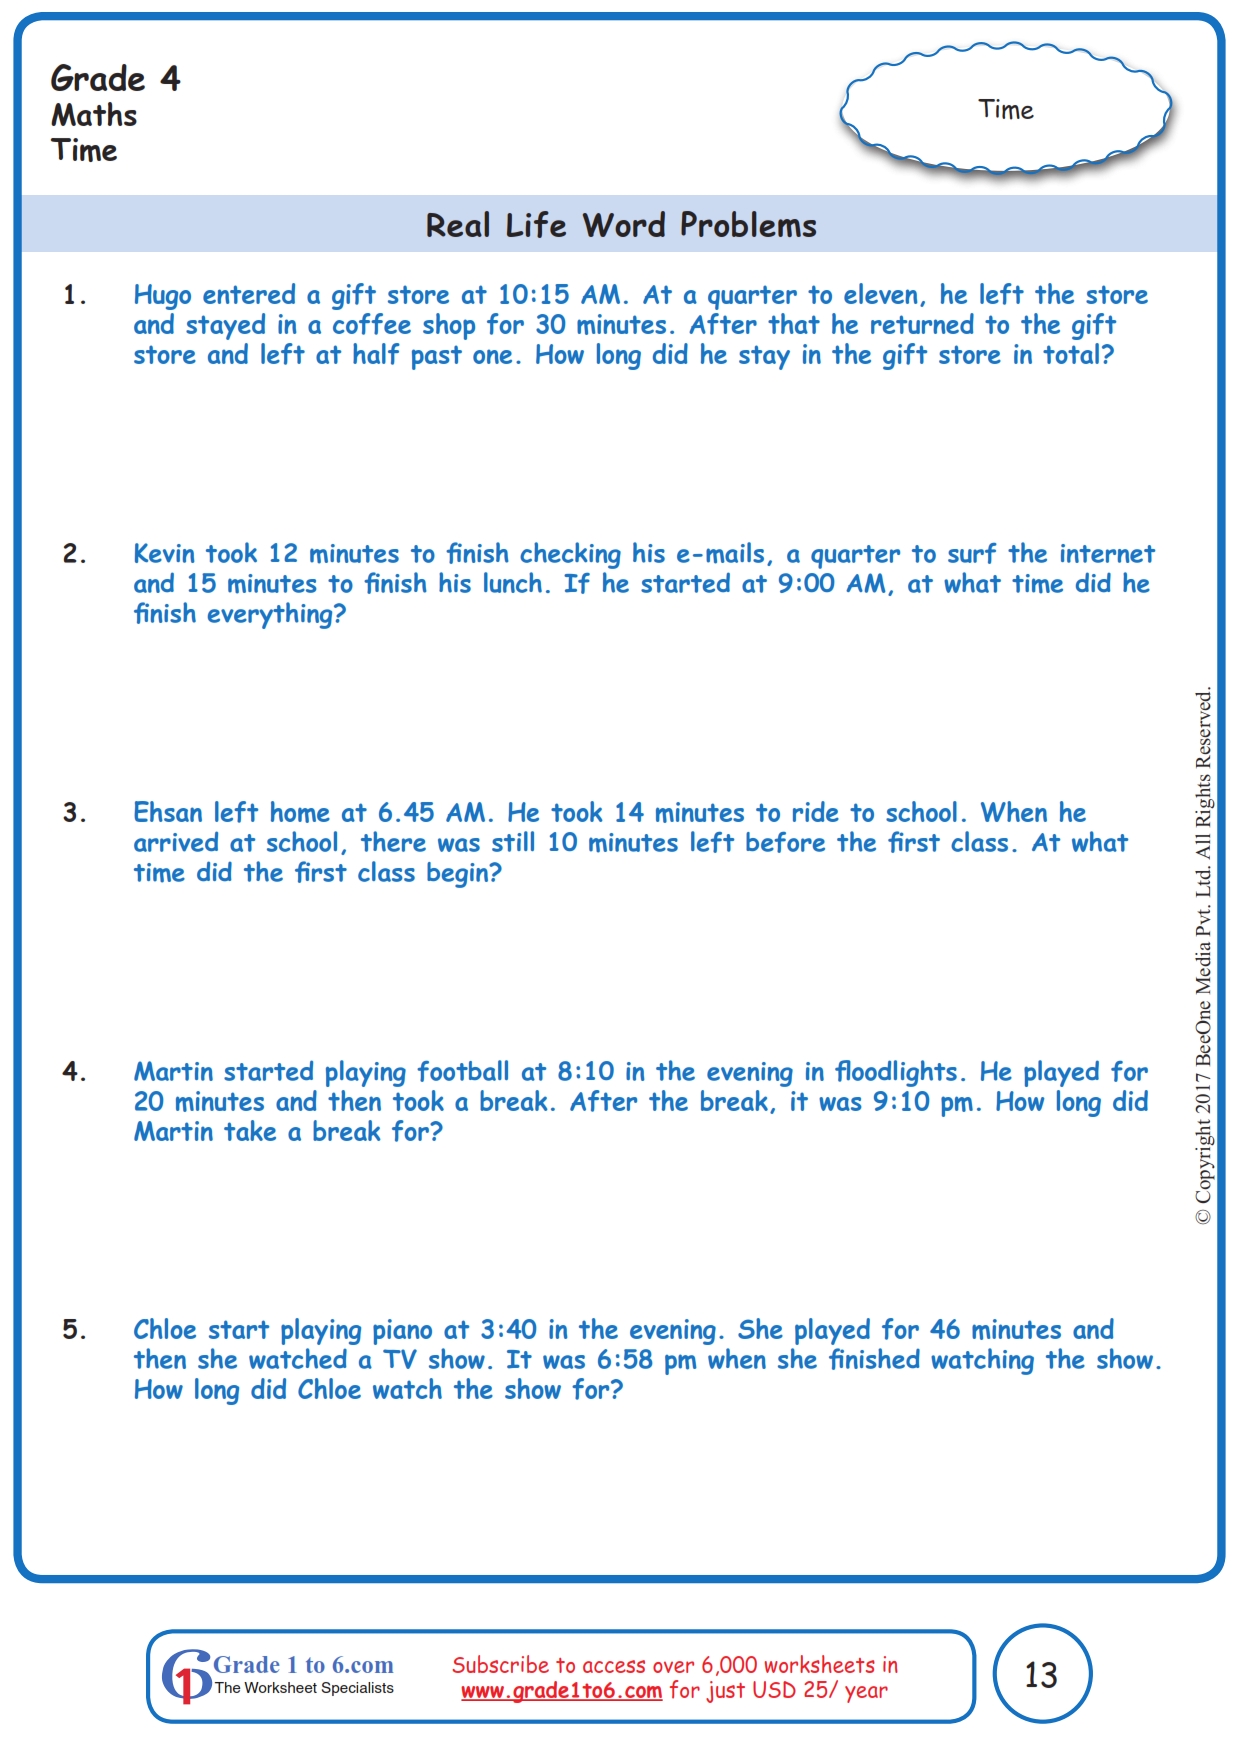 Word Problems in Time Worksheets: Grade 4